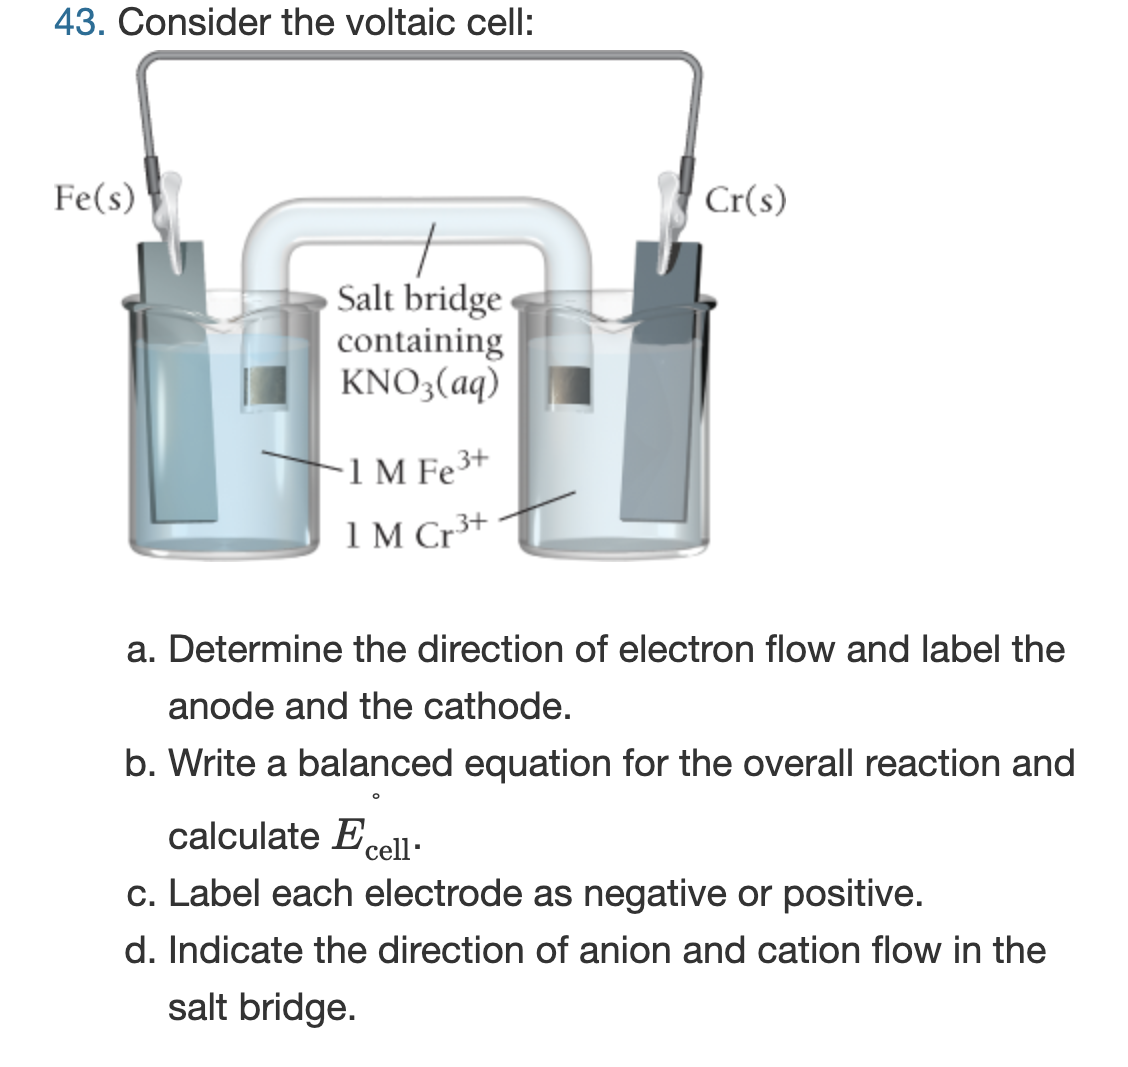 43. Consider the voltaic cell:
Fe(s)
Salt bridge
containing
KNO3(aq)
1 M Fe³+
1M Cr³+
Cr(s)
a. Determine the direction of electron flow and label the
anode and the cathode.
b. Write a balanced equation for the overall reaction and
calculate Ecell-
c. Label each electrode as negative or positive.
d. Indicate the direction of anion and cation flow in the
salt bridge.